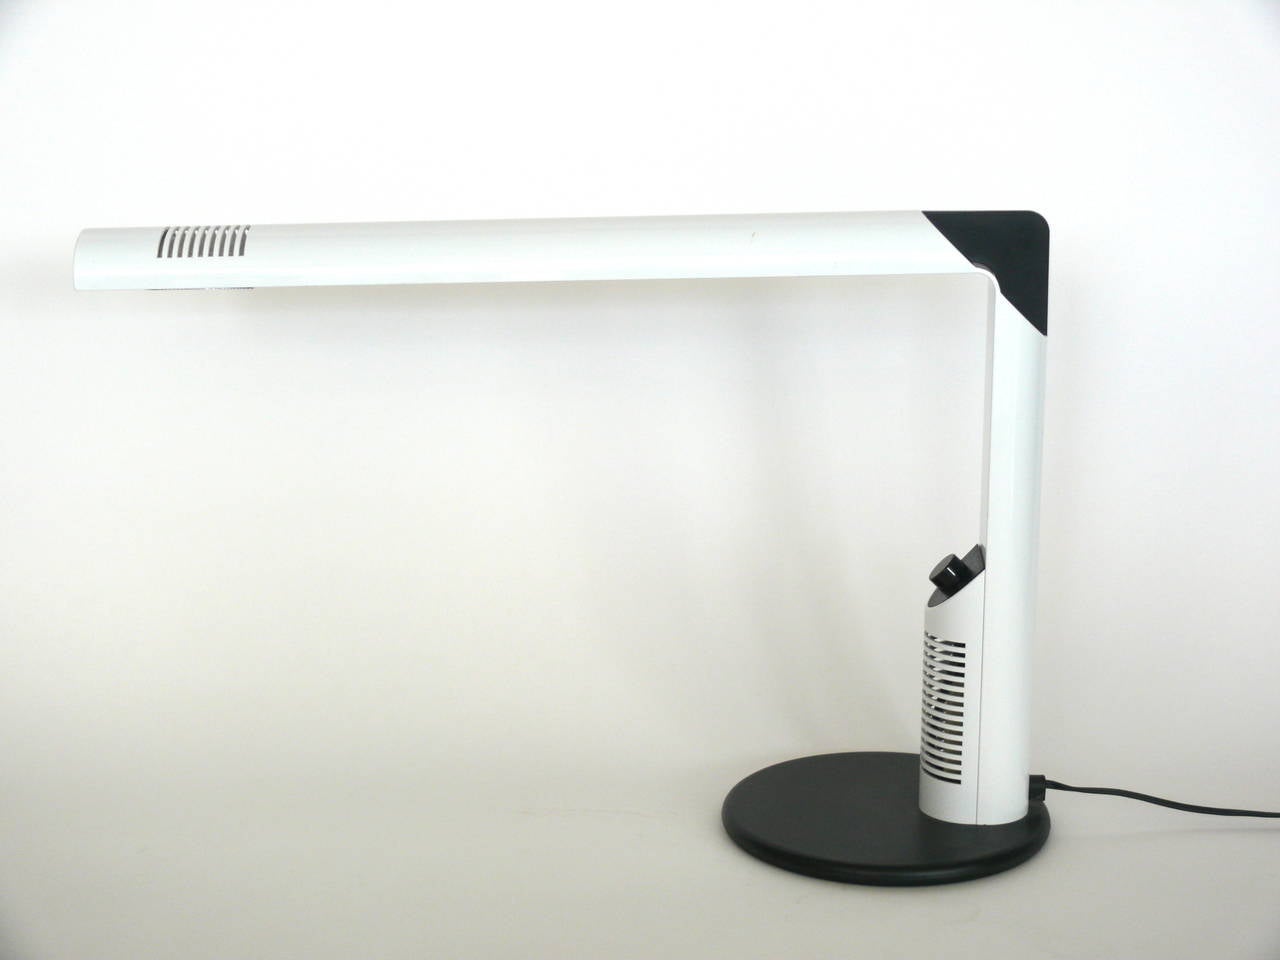 Sleek Italian table lamp by Frattini for Luci. Long light arm extends over black circular rubber base. Clean, modern design. Newly rewired. Illuminates beautifully.